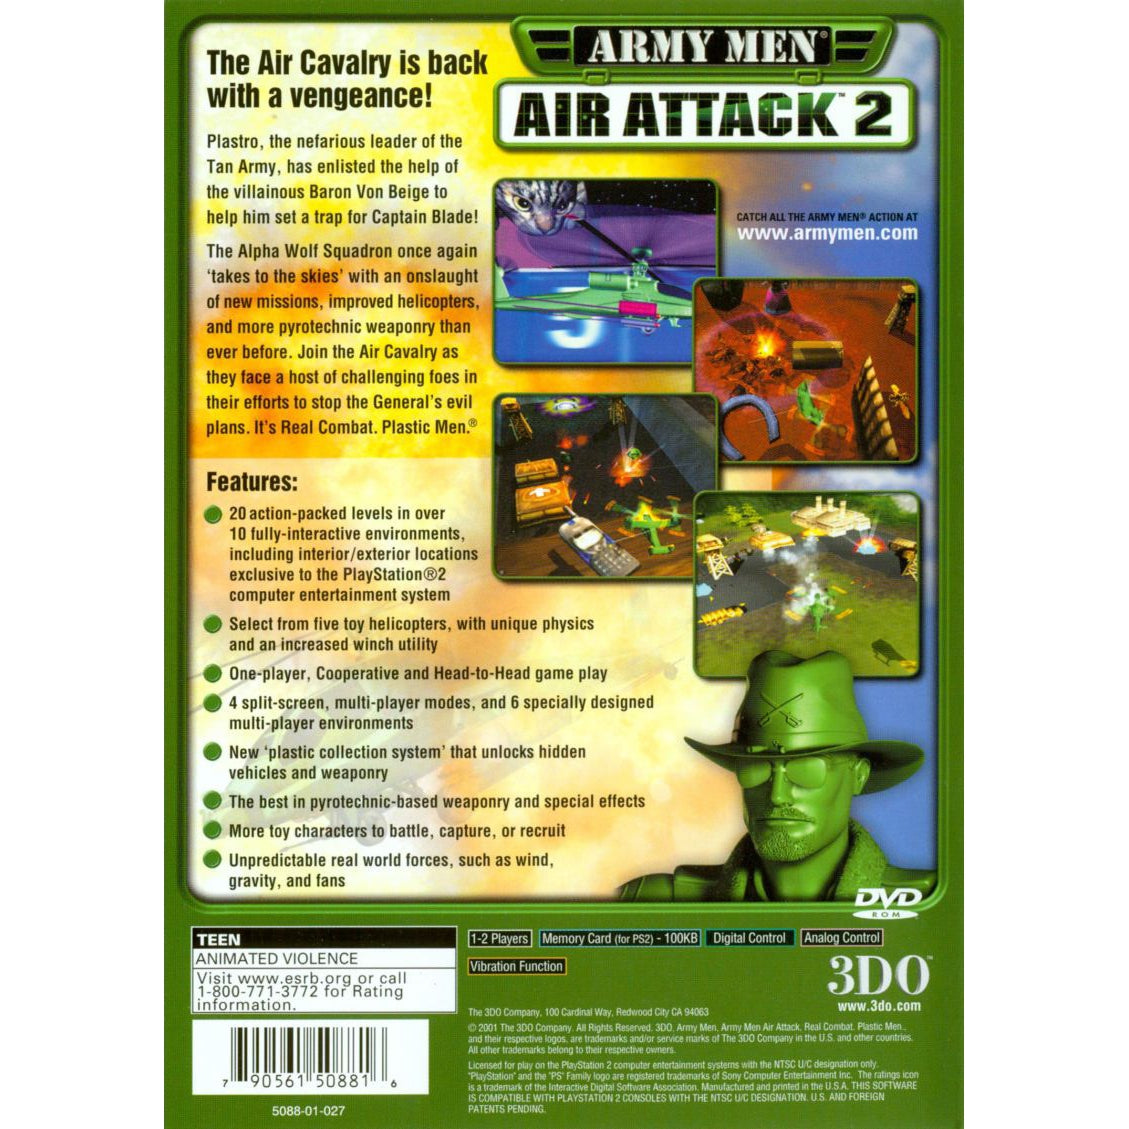 Army Men: Air Attack 2 - PlayStation 2 (PS2) Game Complete - YourGamingShop.com - Buy, Sell, Trade Video Games Online. 120 Day Warranty. Satisfaction Guaranteed.